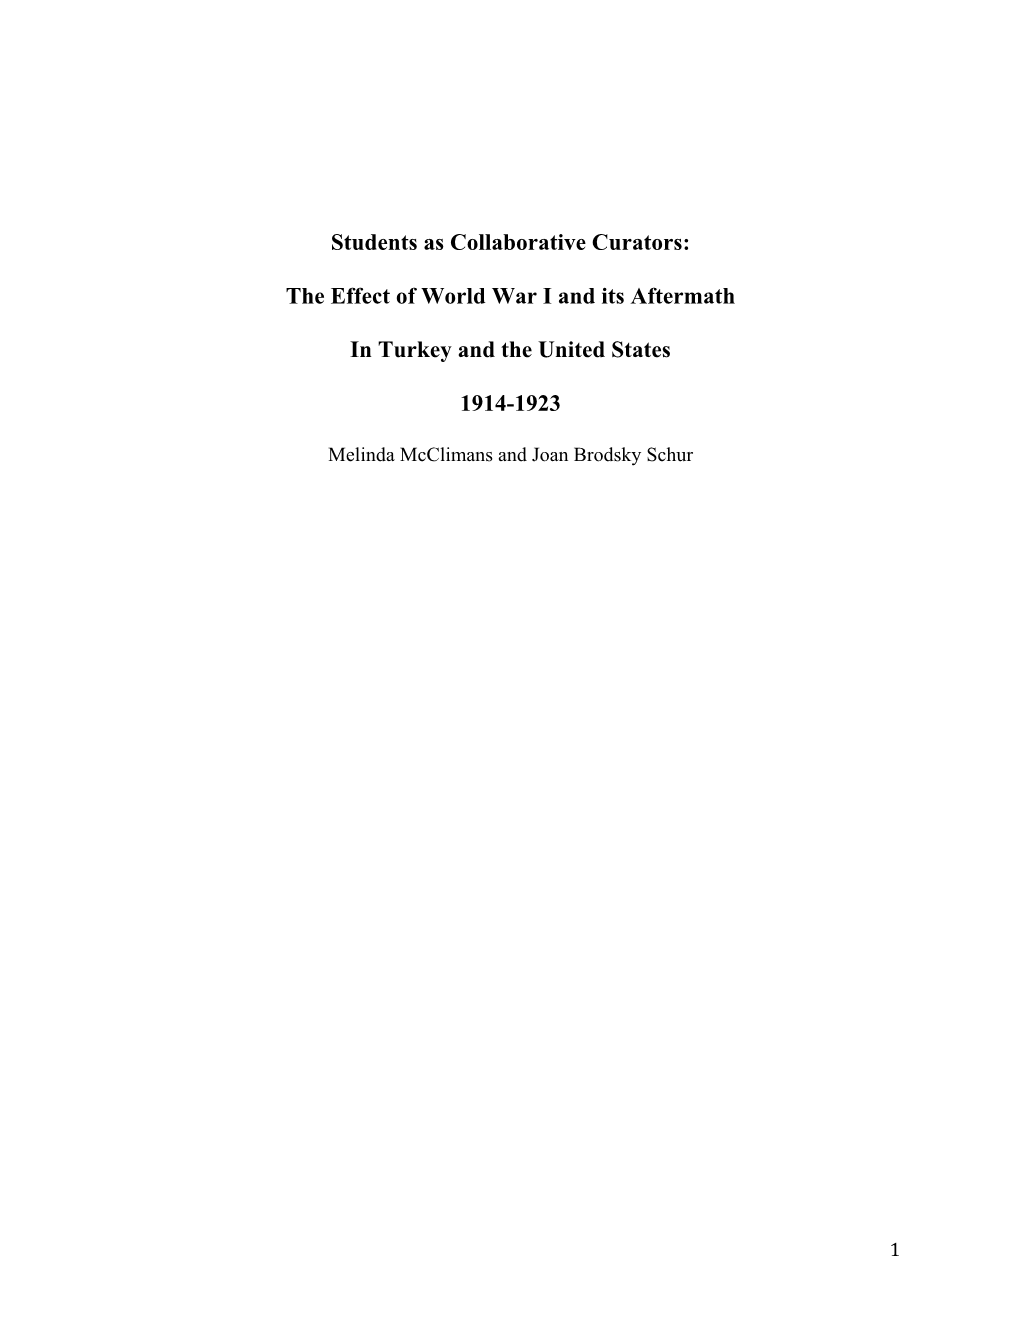 Students As Collaborative Curators: the Effect of World War I and Its Aftermath in Turkey and the United States 1914-1923